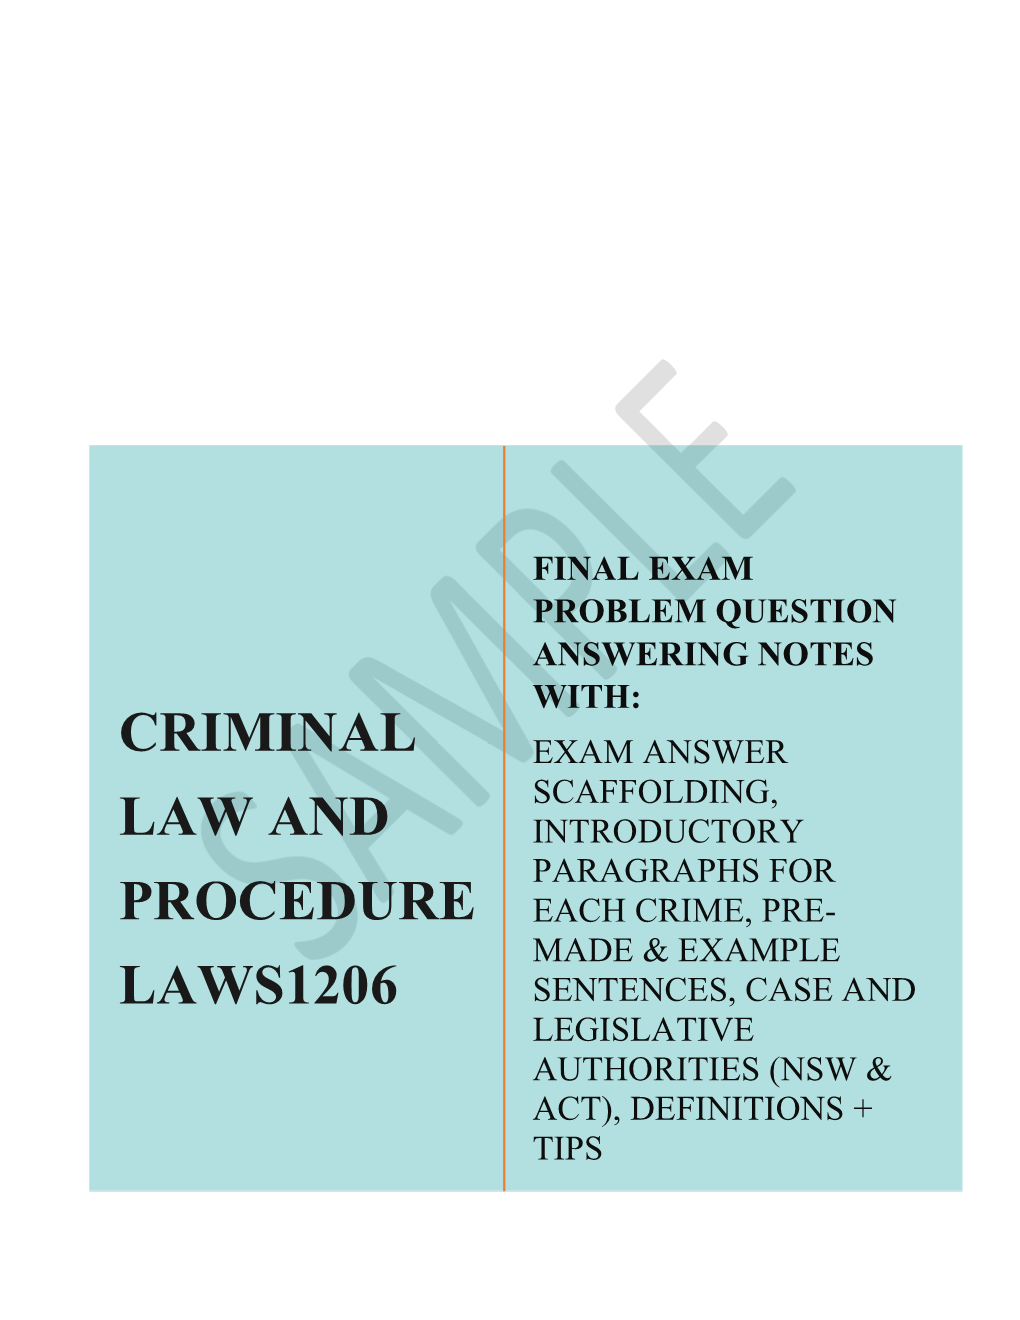 Criminal Law and Procedure Laws1206